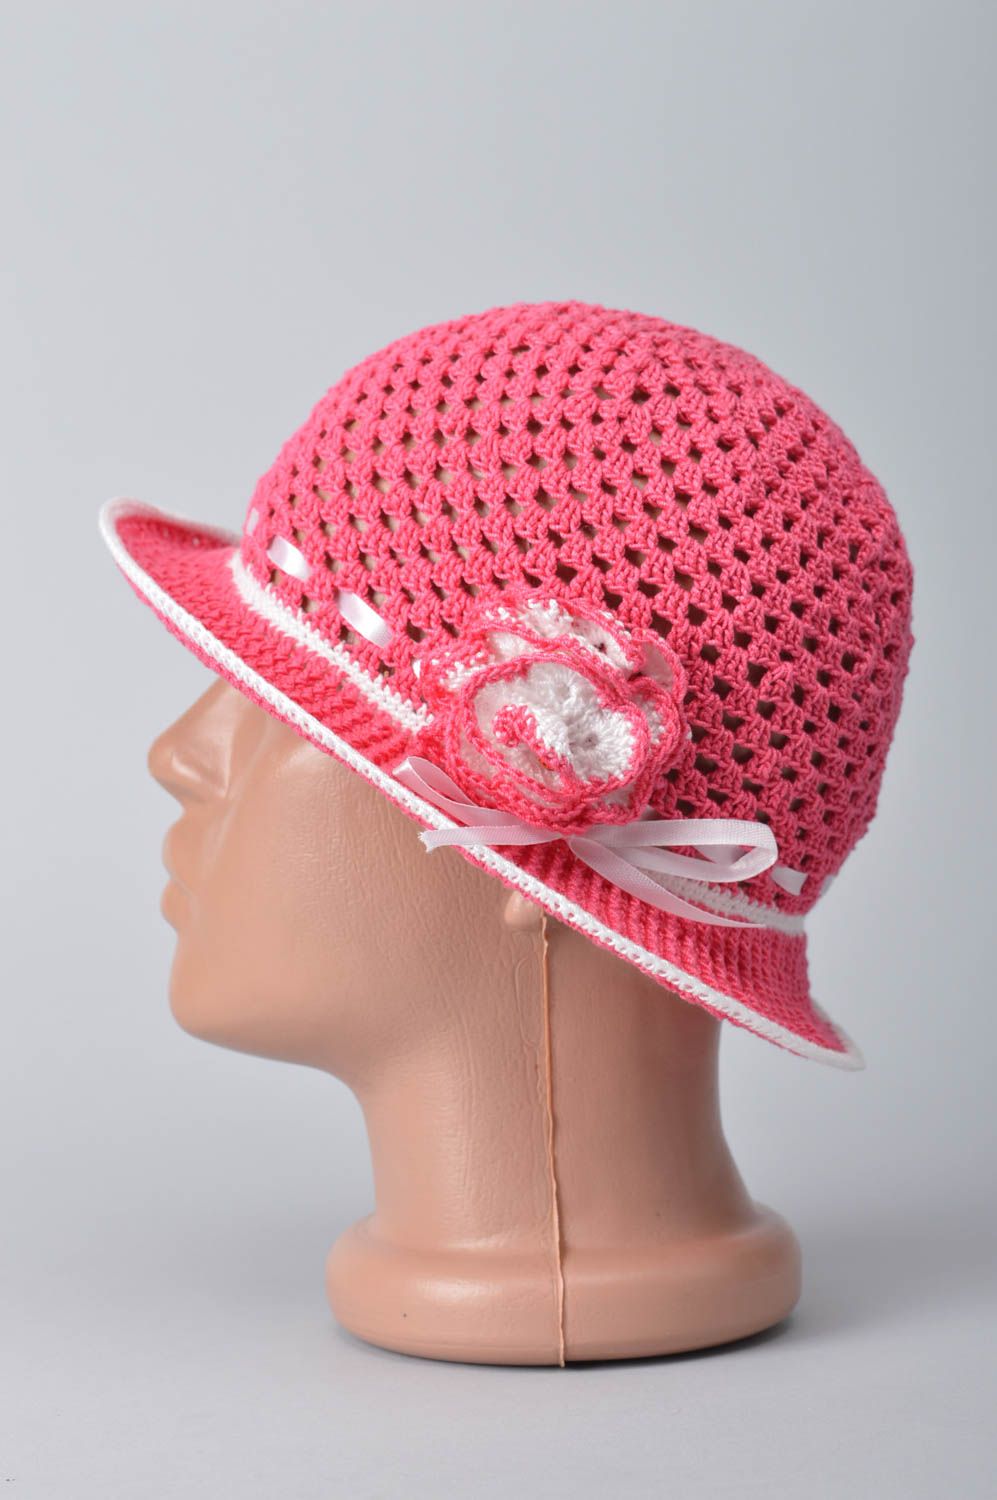 Crochet hat handmade accessories kids clothing gifts for baby girl toddler hat photo 8